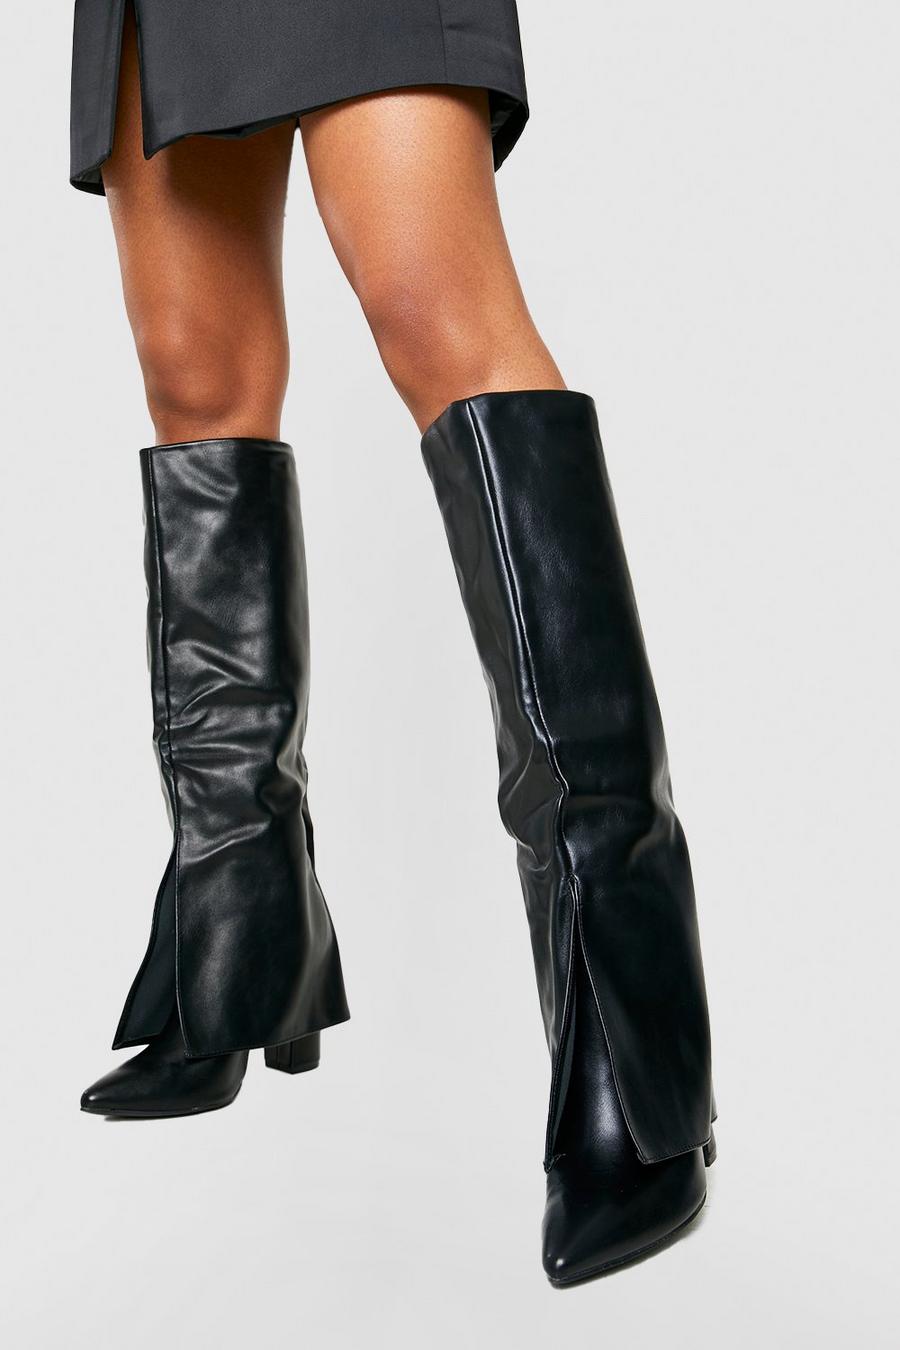 Black Fold Over Knee High Boots